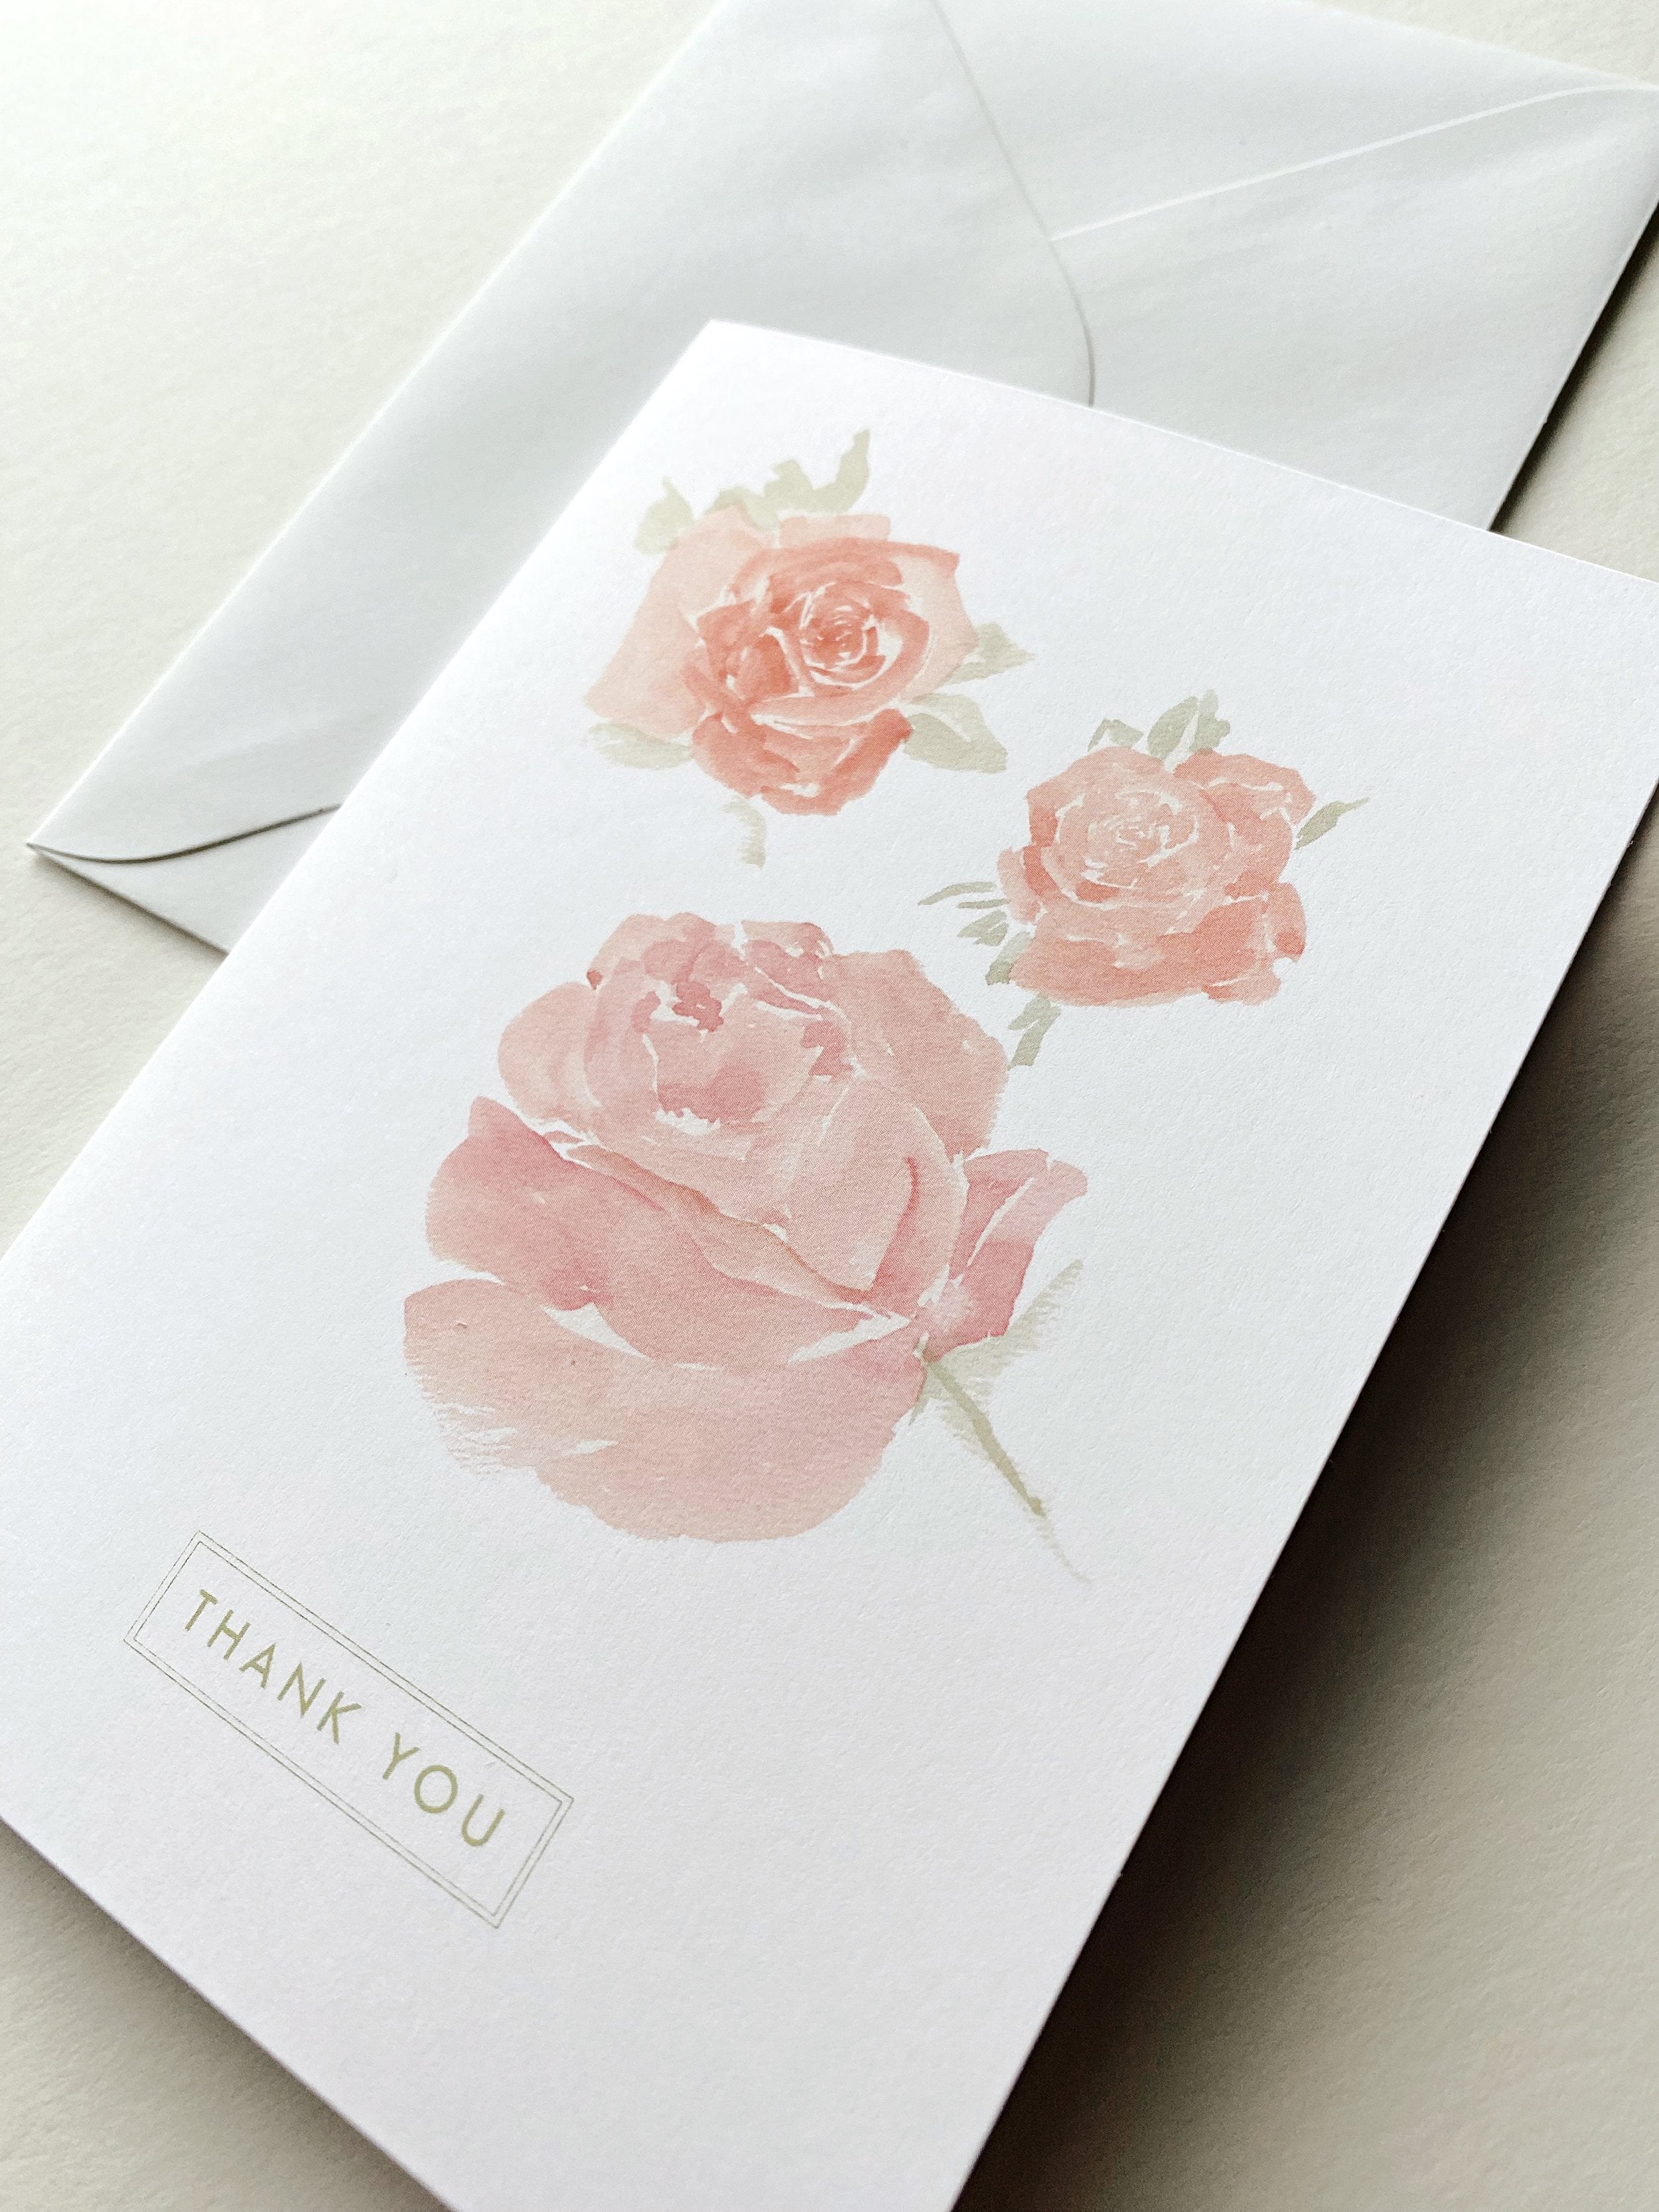 ROSES Watercolor Map - thank you card